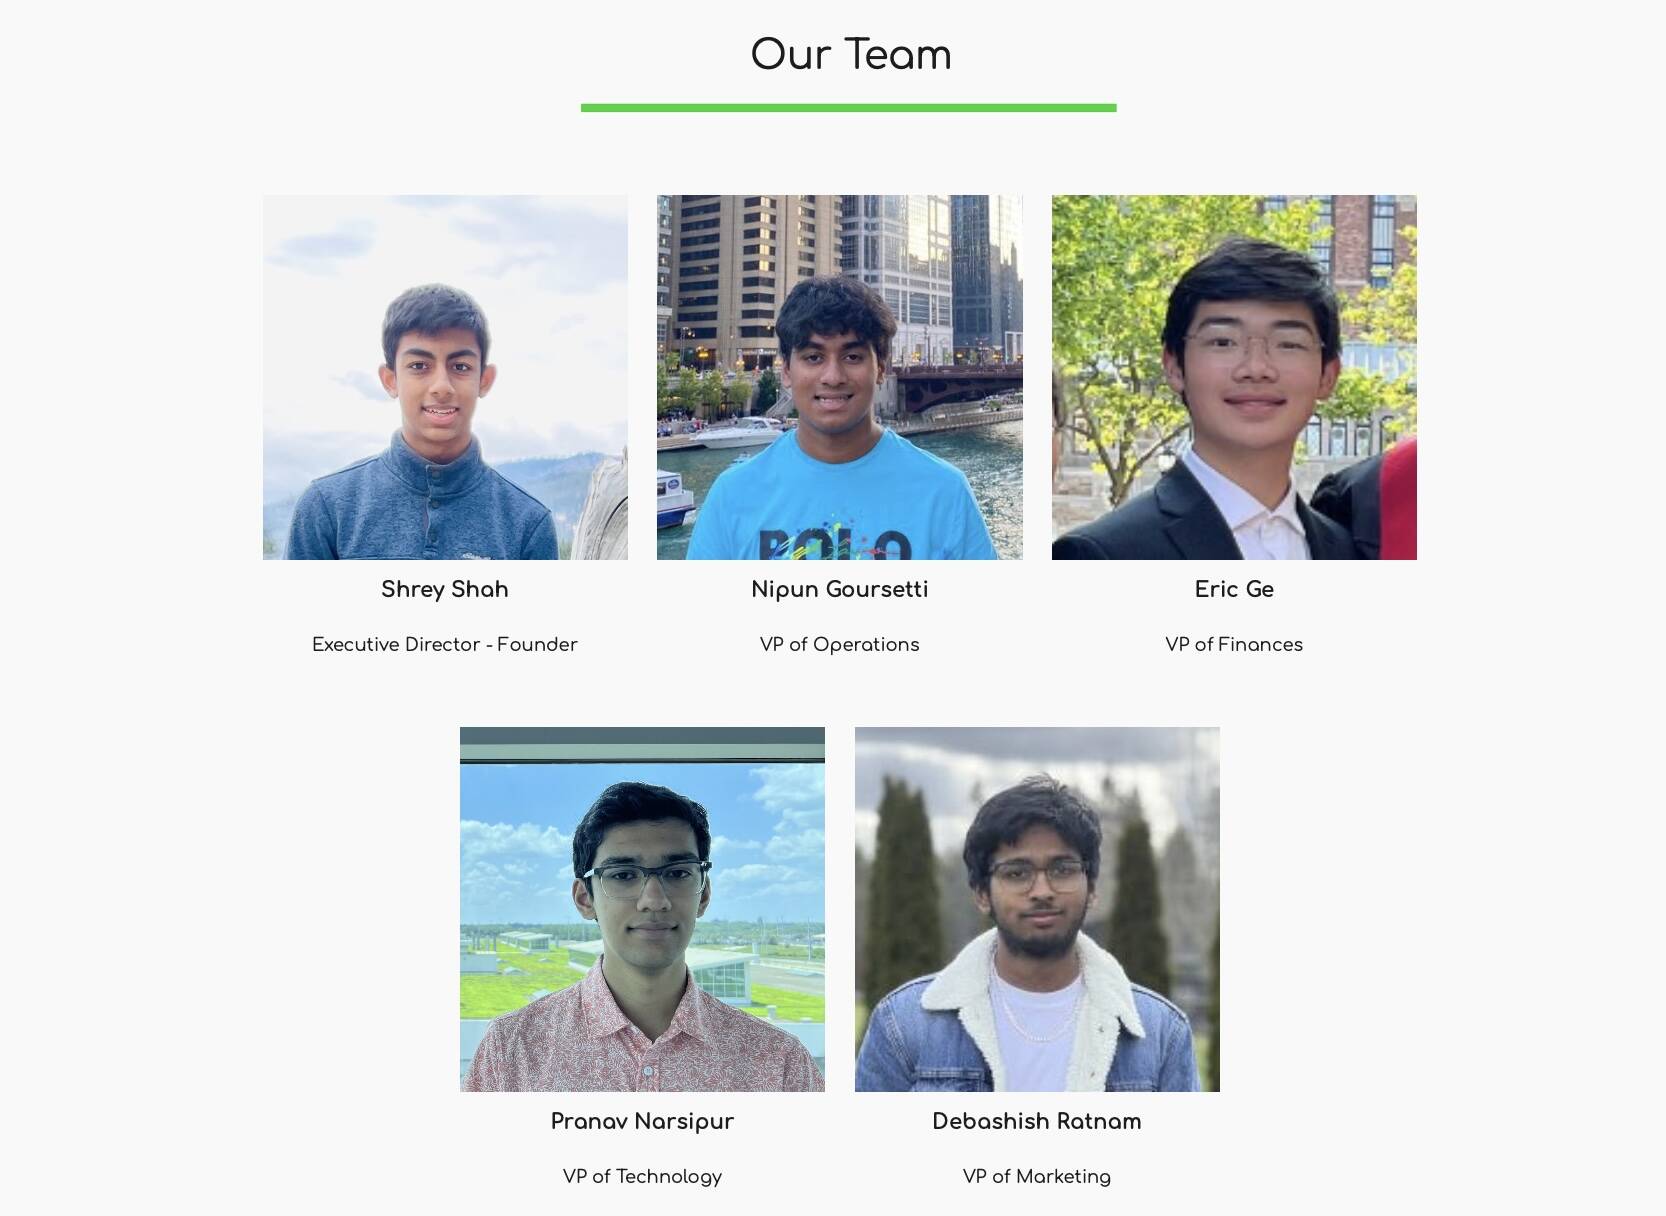 The five Redmond High School executive board members who began Redmond Coding Association in 9th grade and continue as board members 2 years later. (Photo Courtesy of Redmond Coding Association)